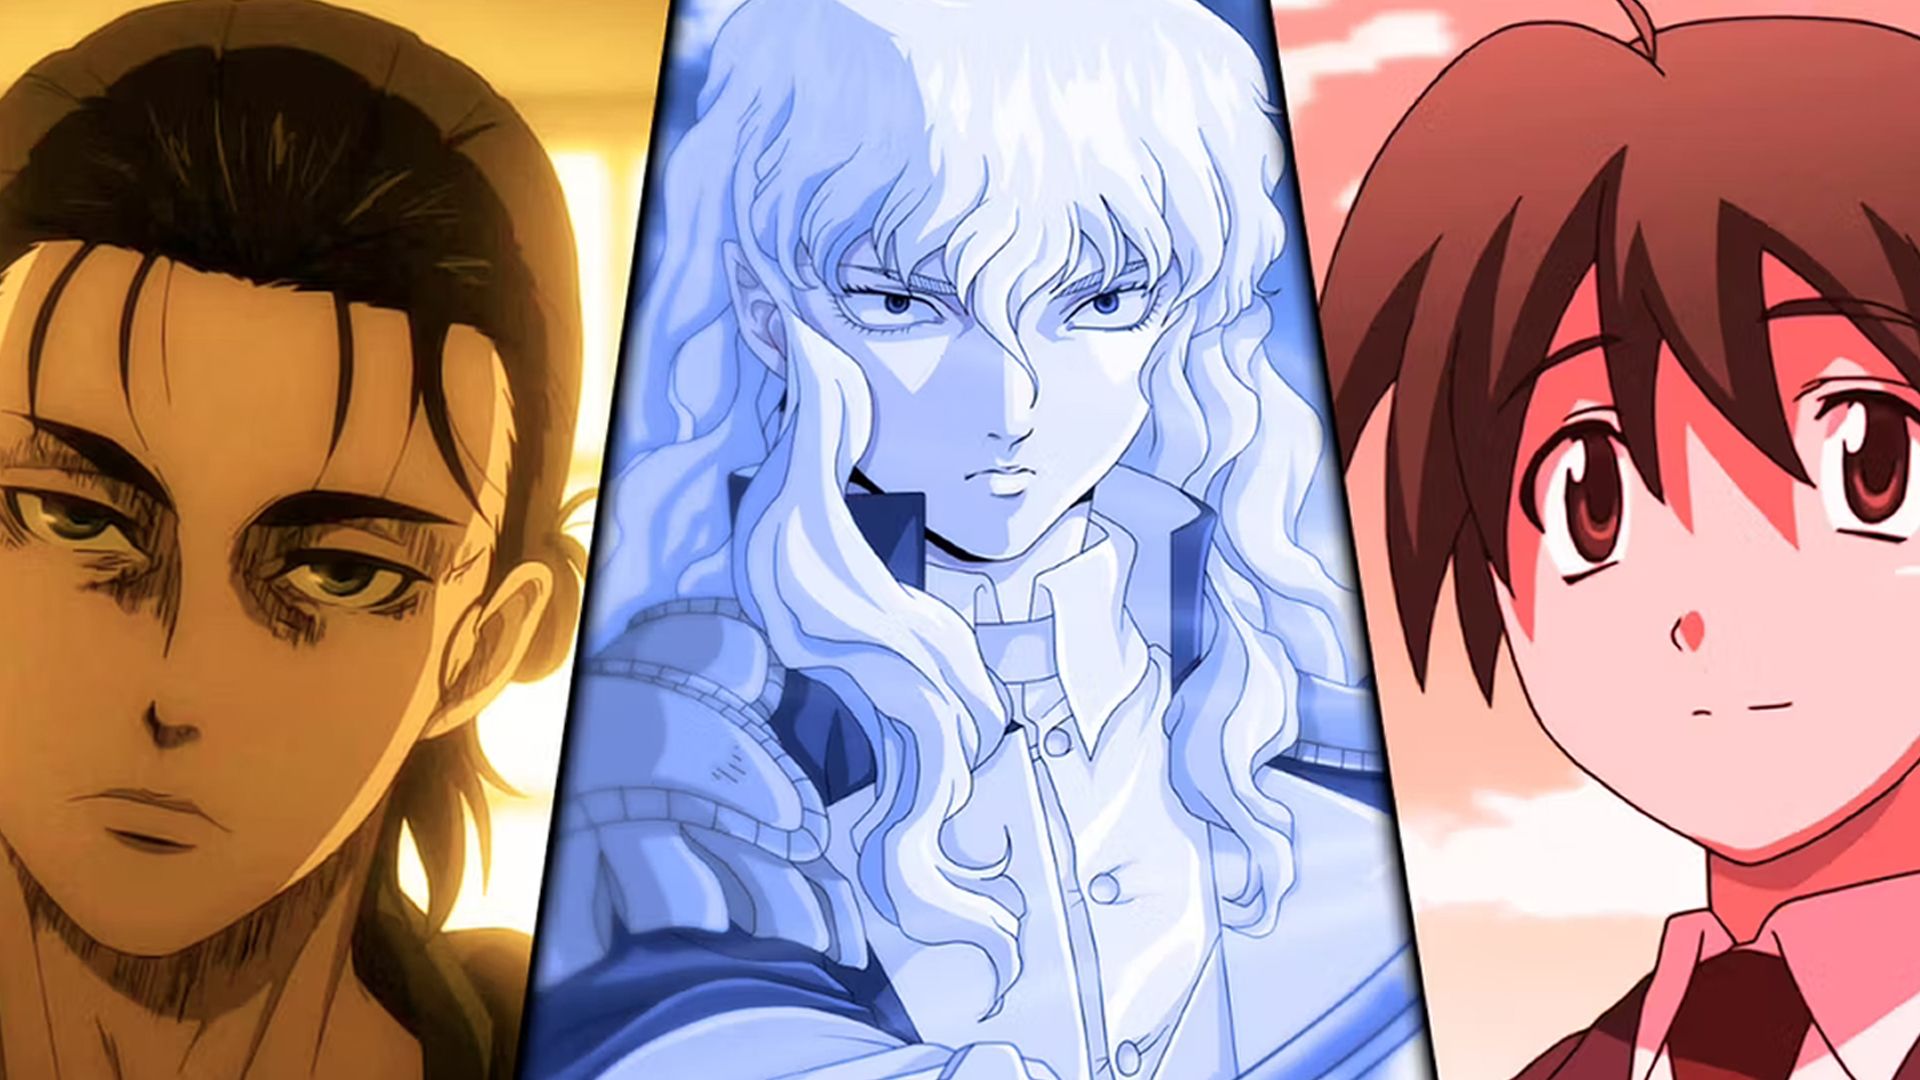 Eren from Attack on Titan, Griffith from Berserk, and Makoto Itou from School Days